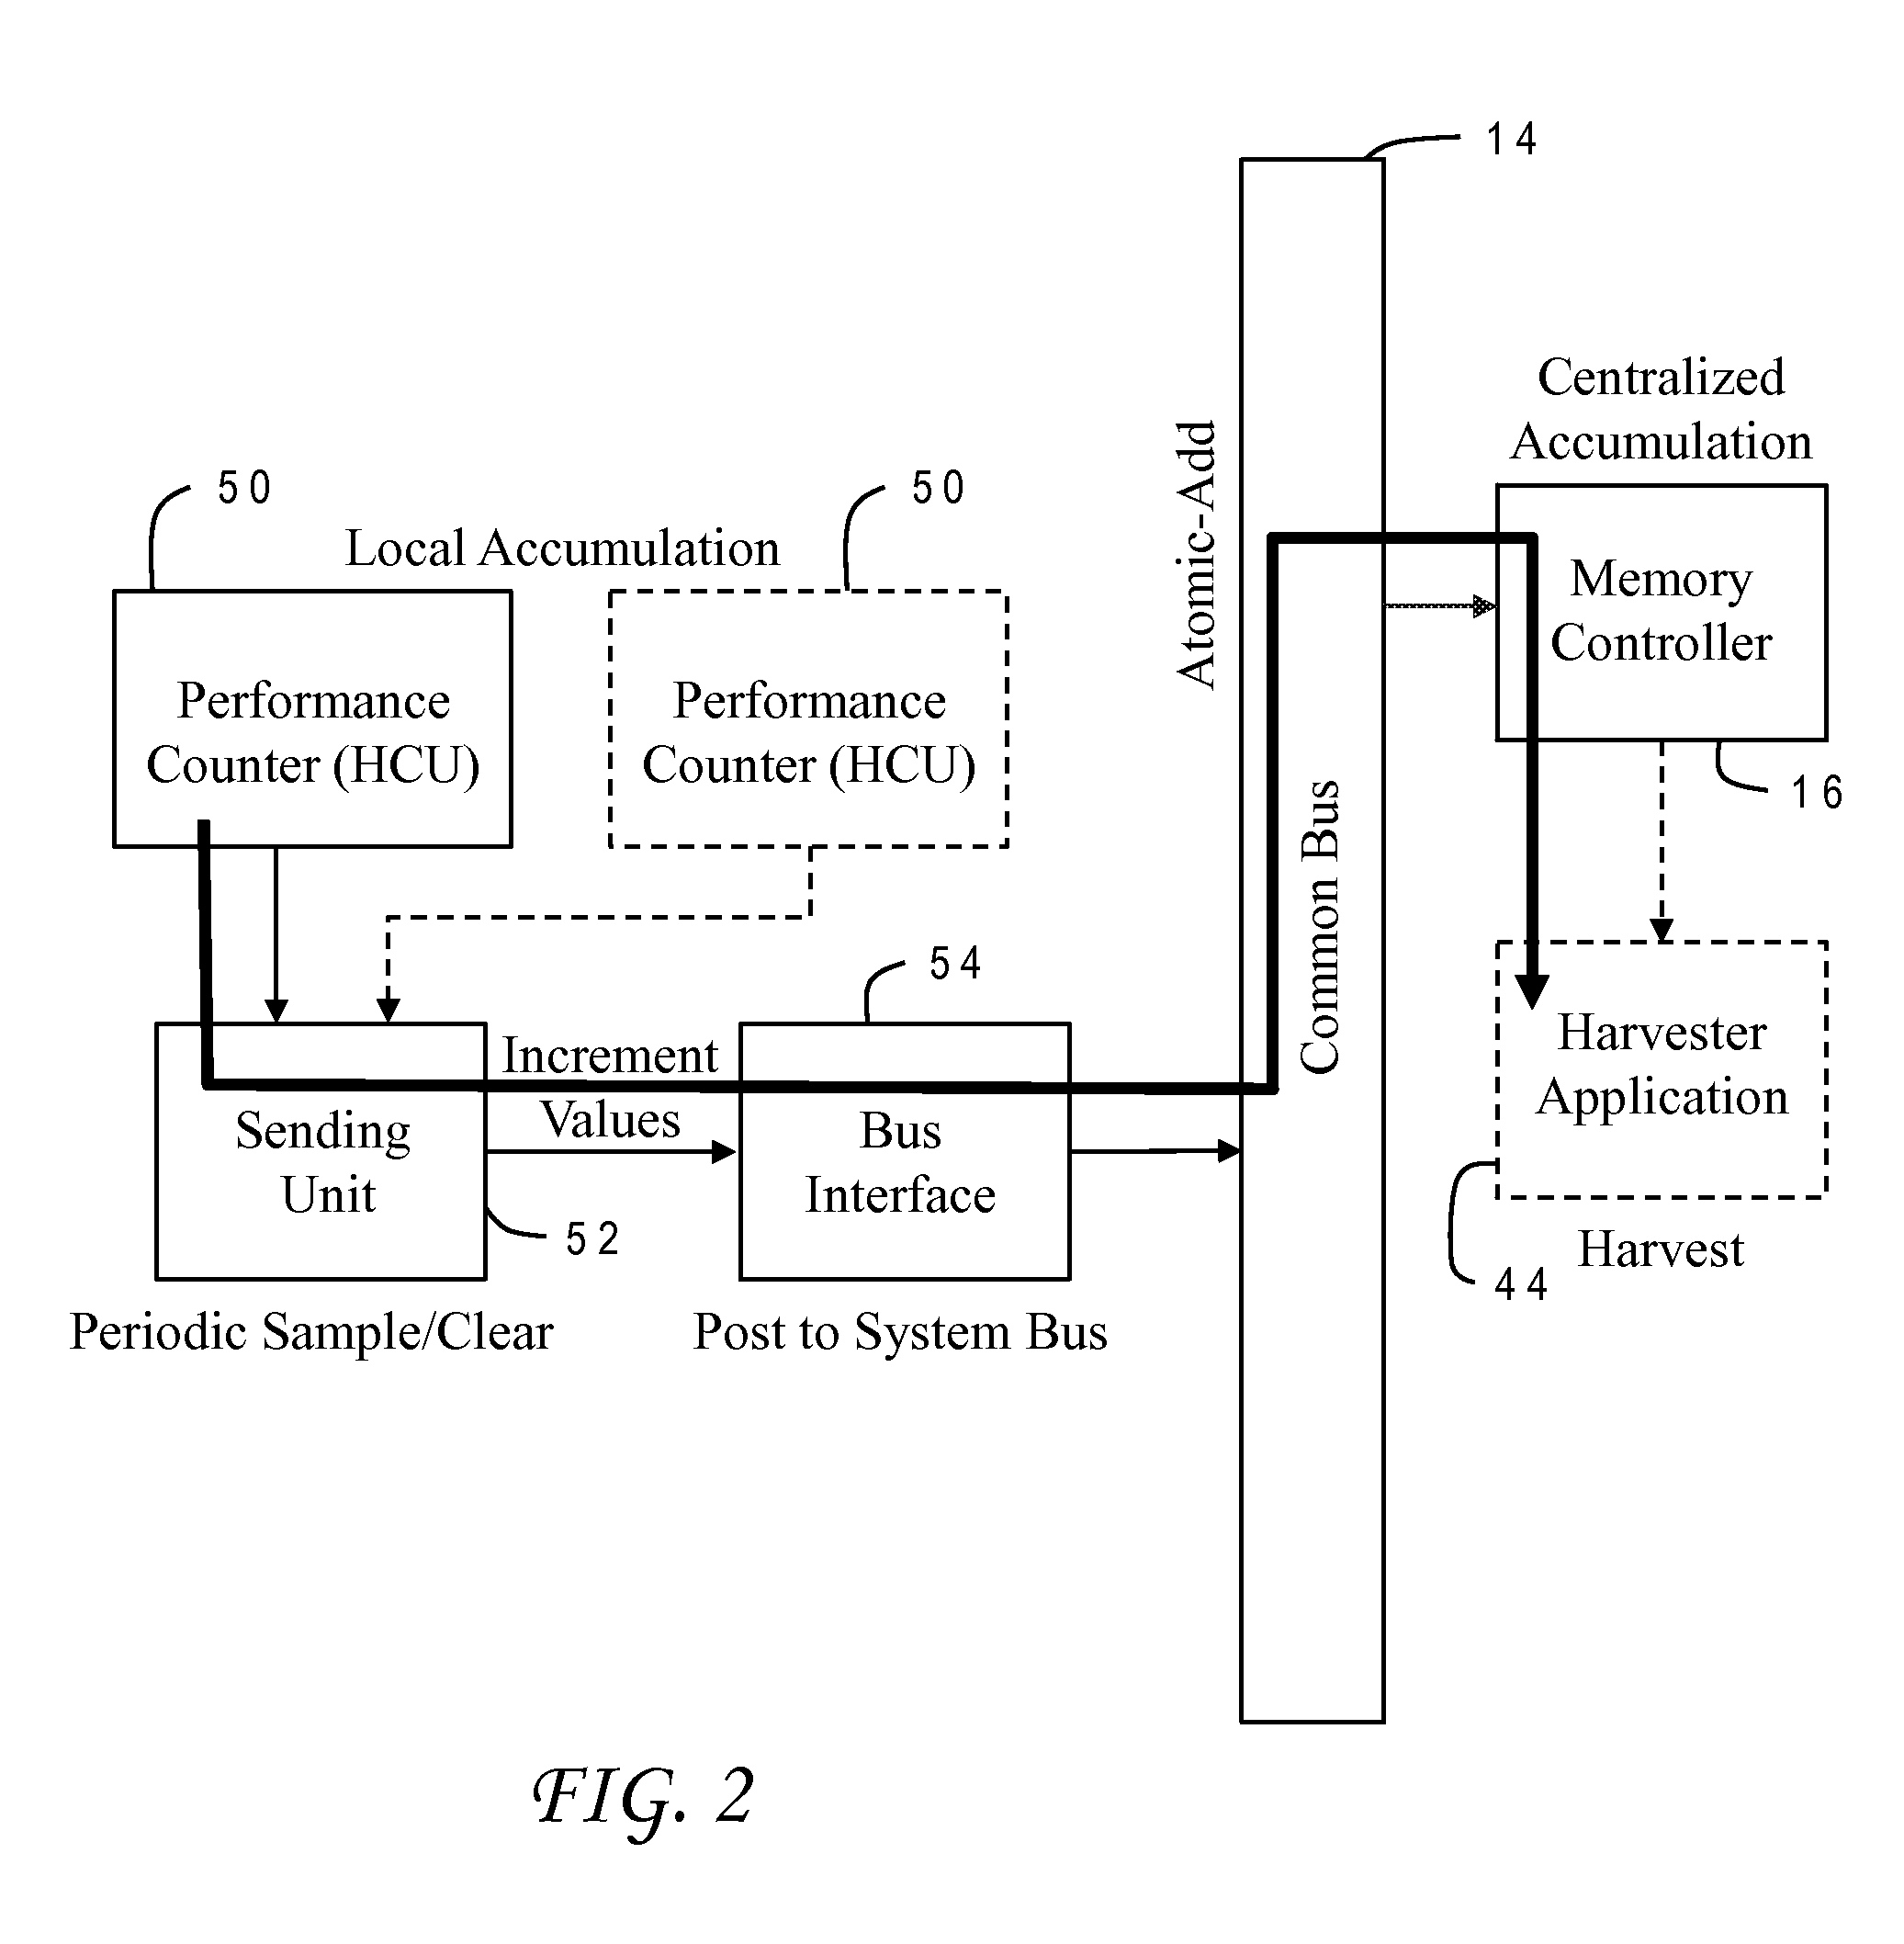 Continuous in-memory accumulation of hardware performance counter data